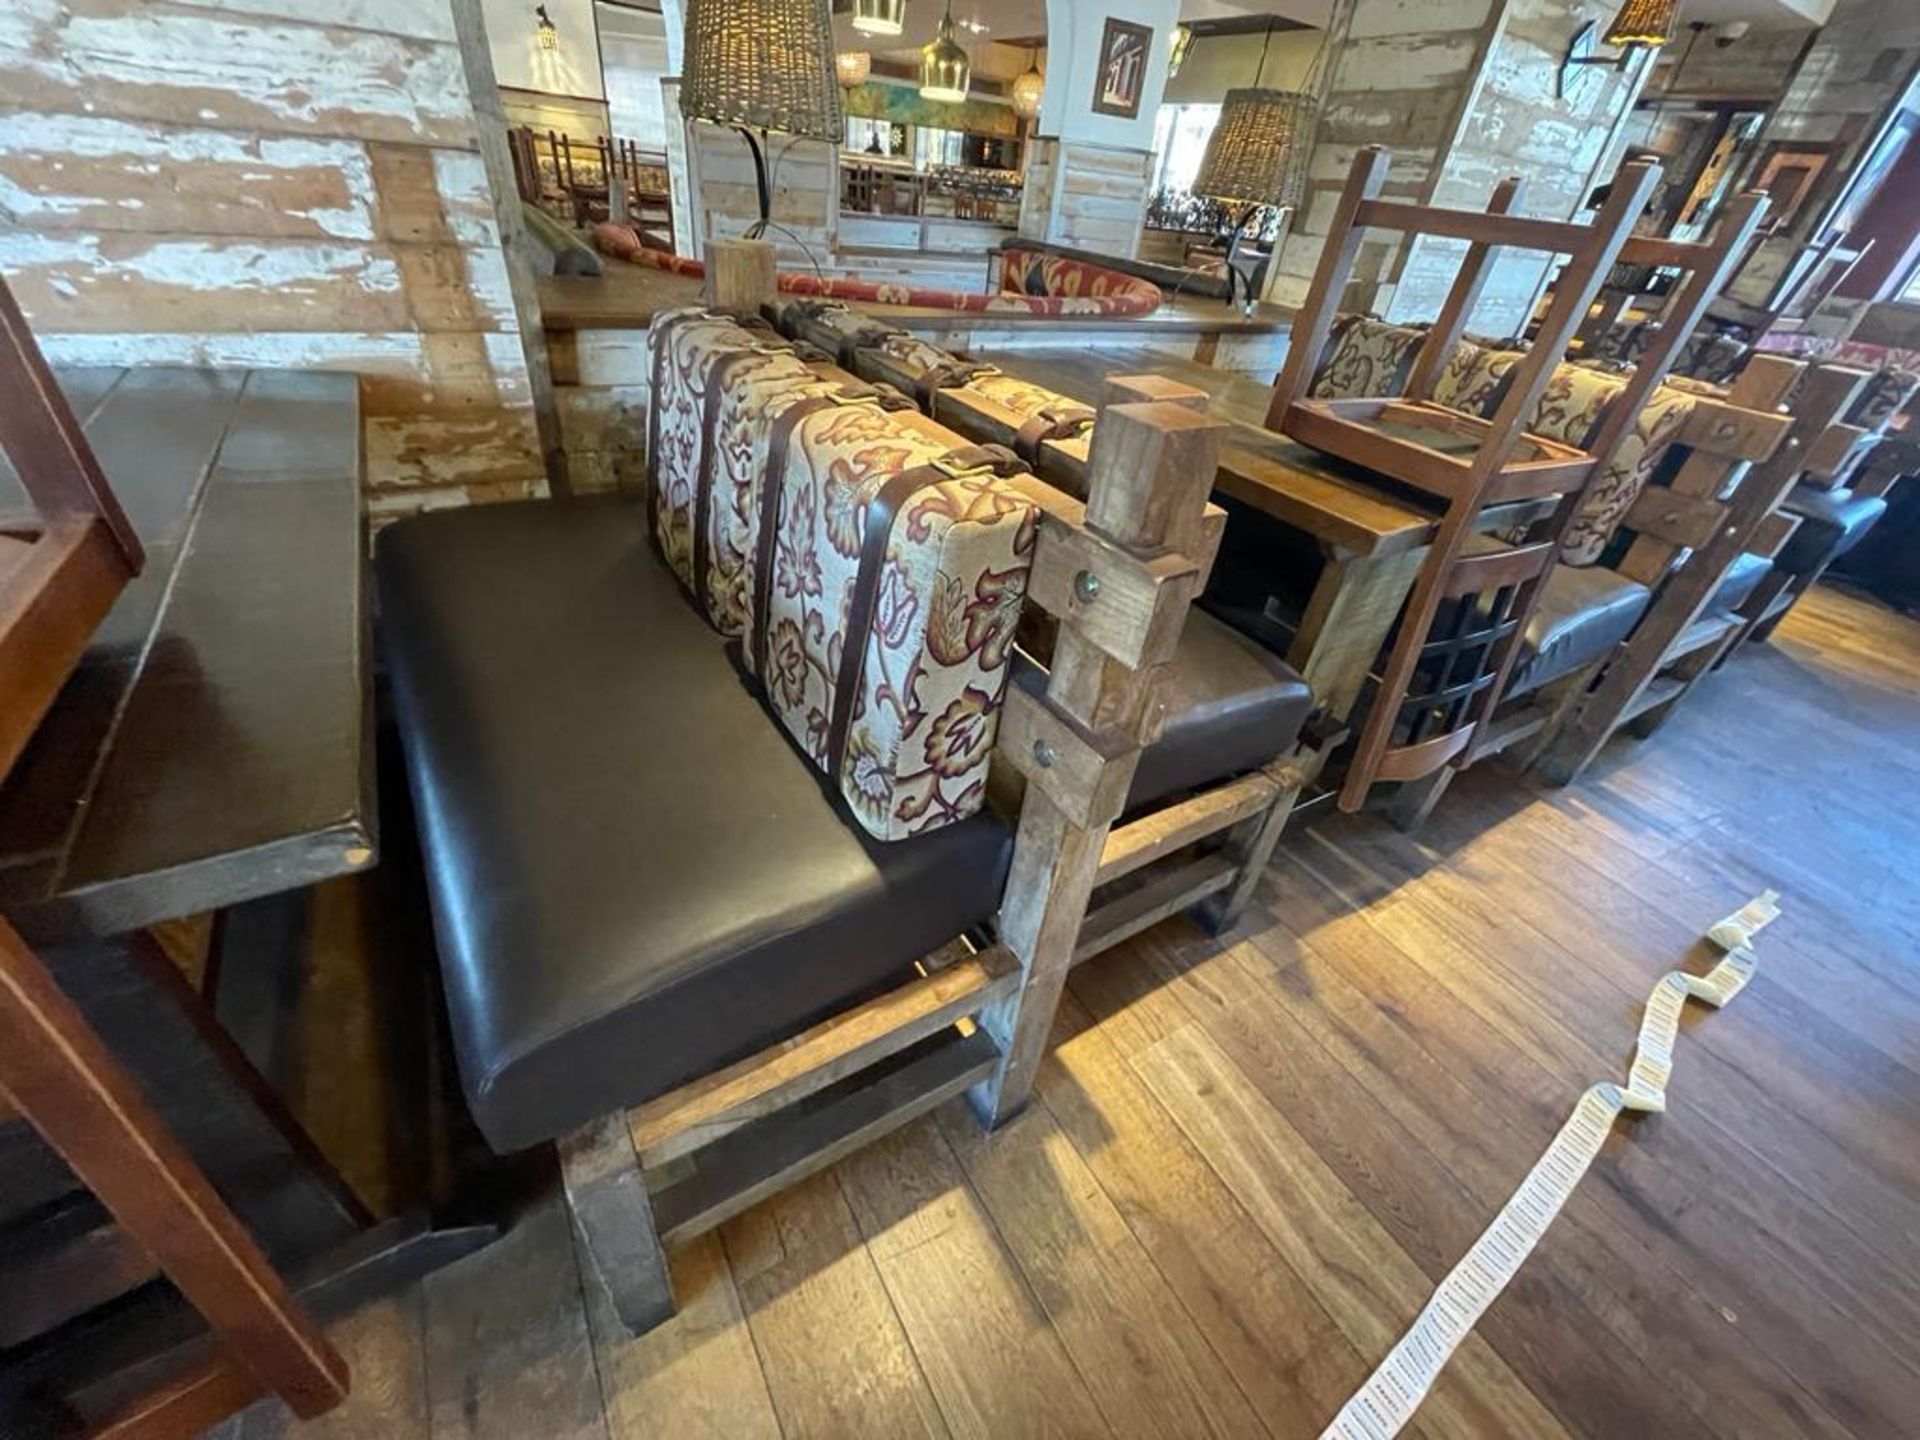 2 x Rustic Seating Benches Featuring Timber Frames, Brown Faux Leather Seat Pads and Floral Fabric - Image 5 of 13